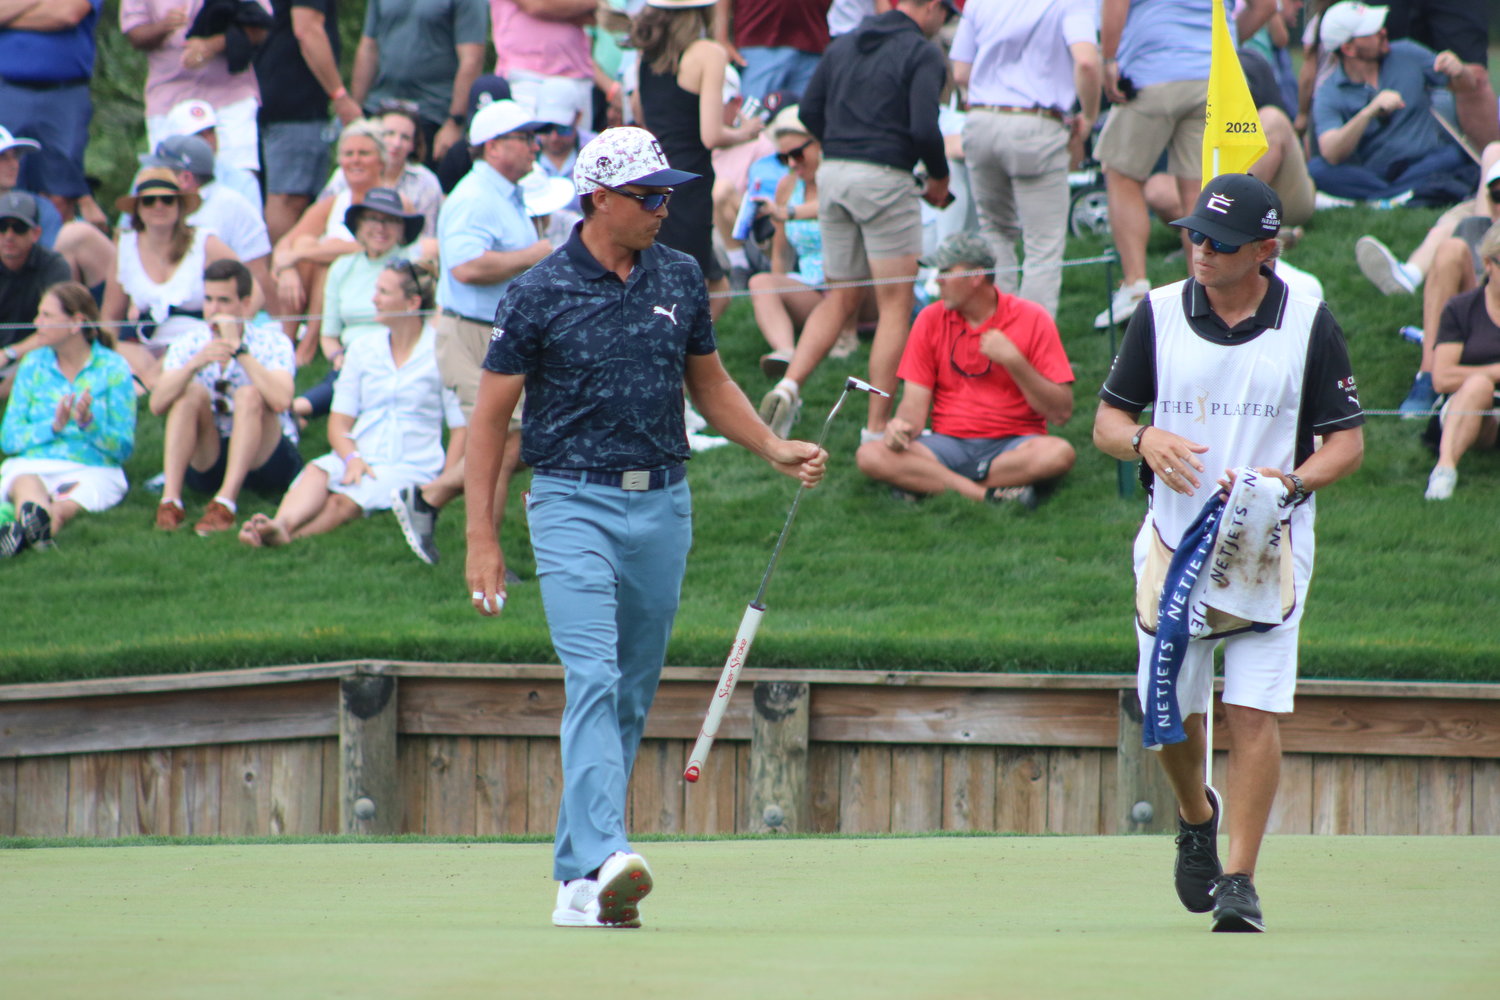 Rickie Fowler made a move up the leaderboard during the second round.